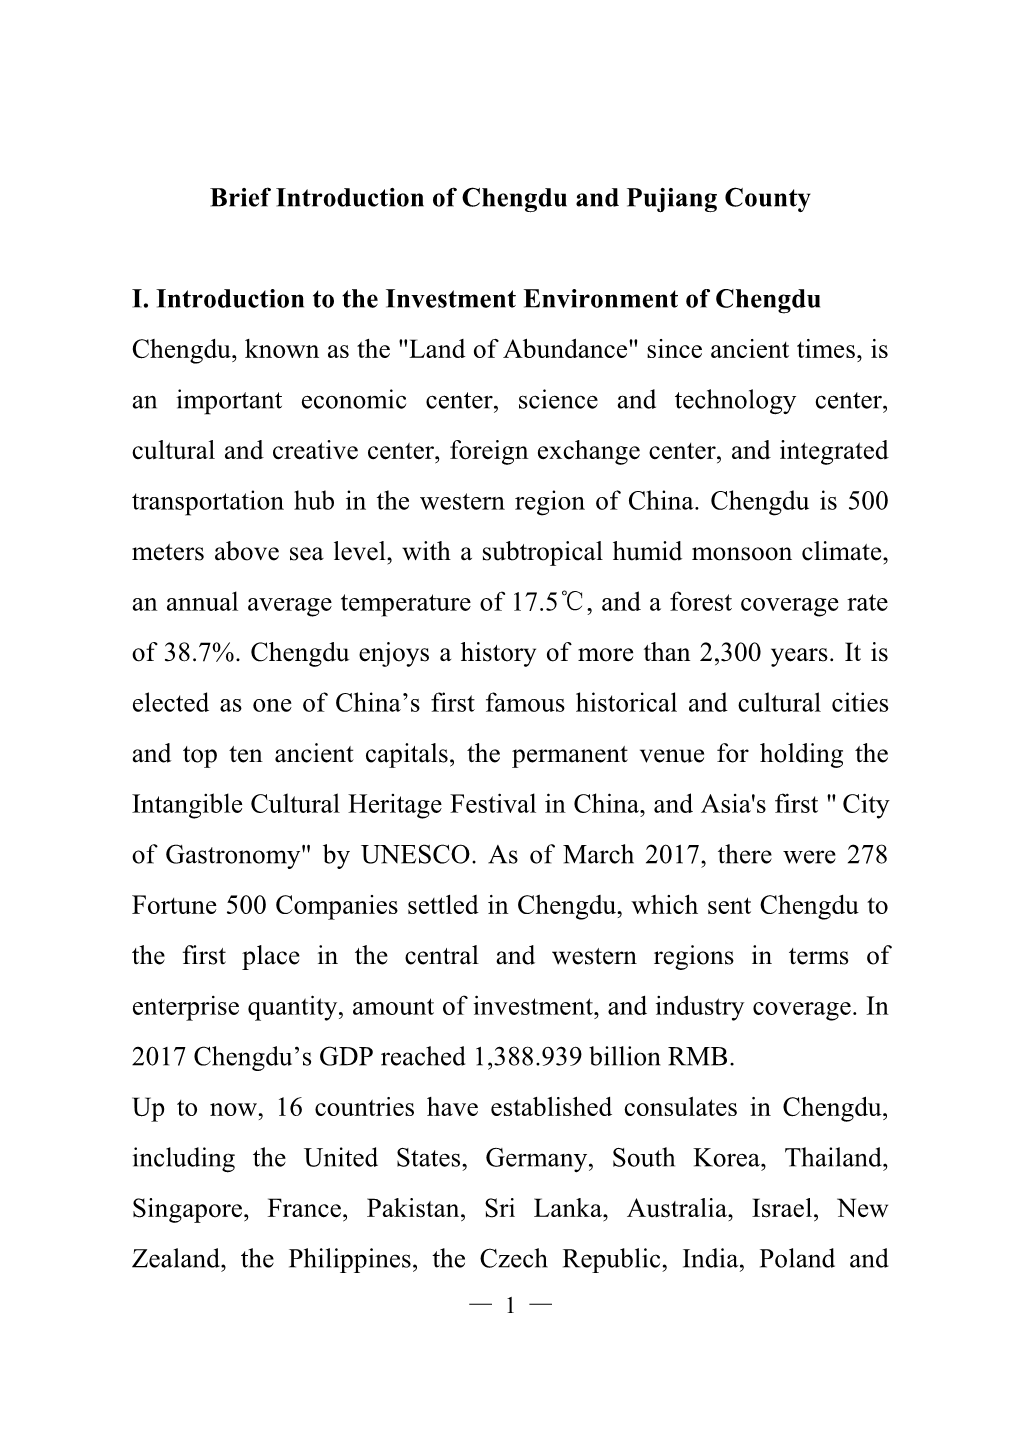 Brief Introduction of Chengdu and Pujiang County